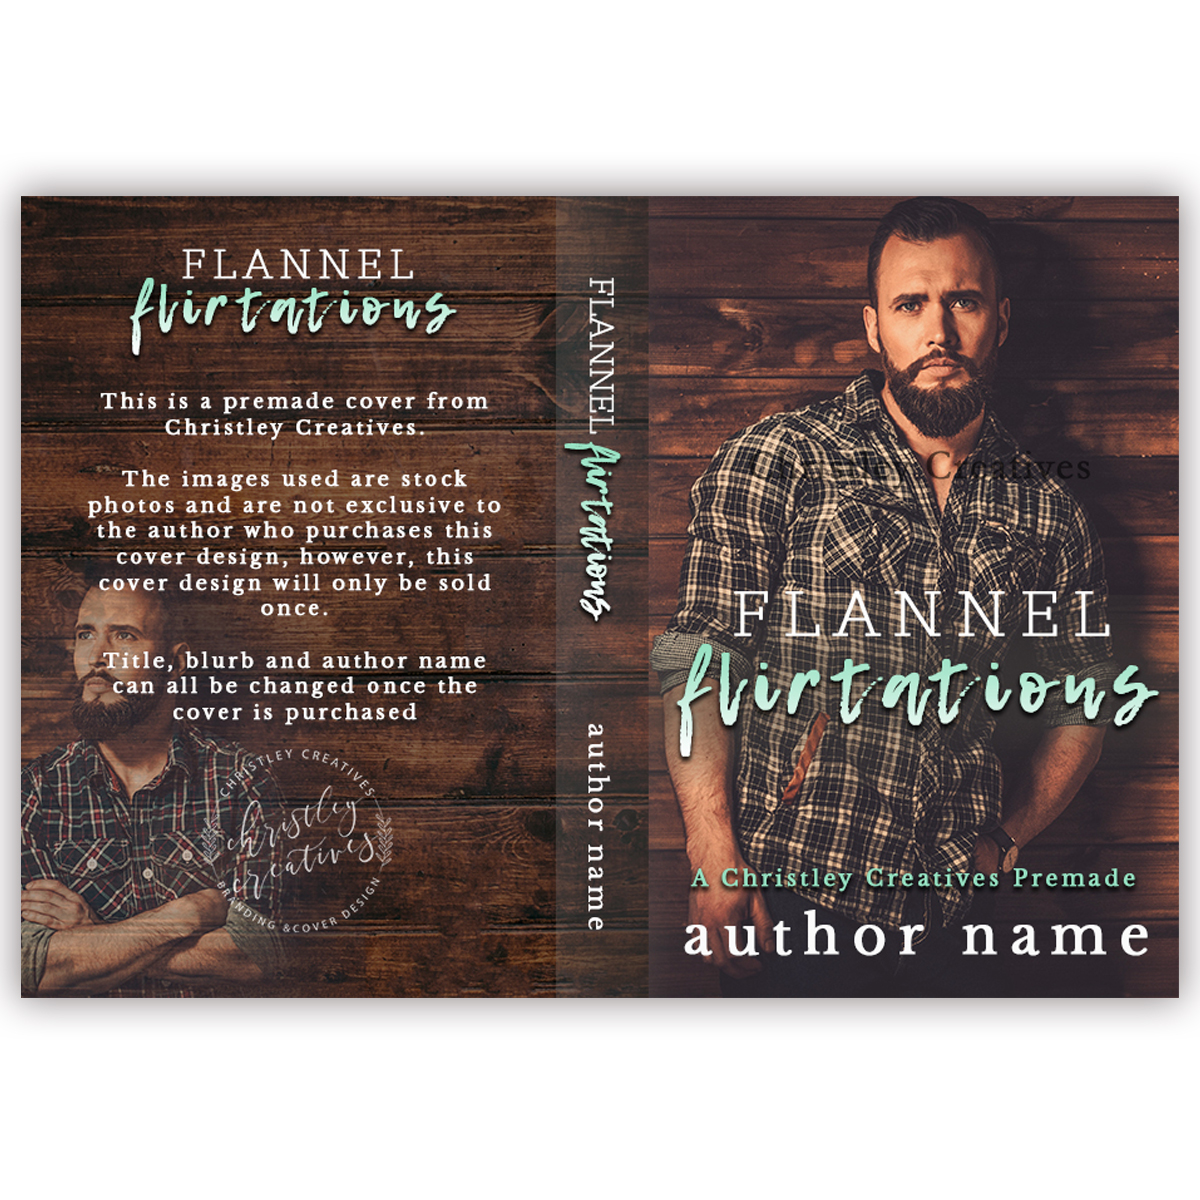 Flannel Flirtations - Premade Contemporary Romance Book Cover from Christley Creatives